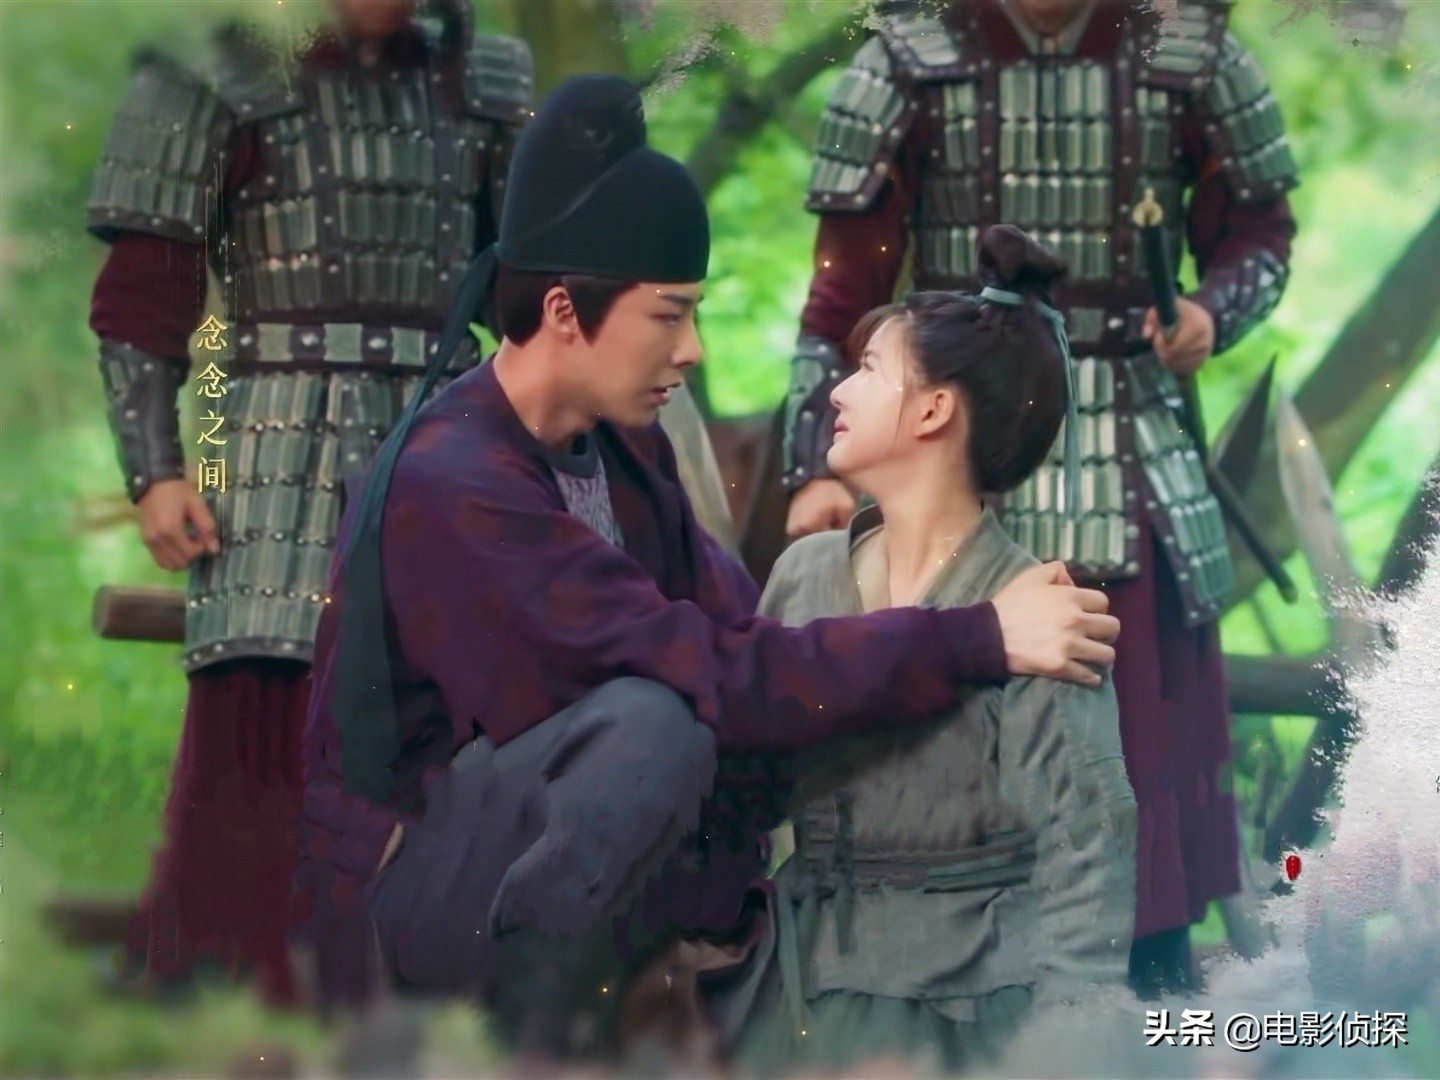 " long song goes " : Bright 3 rescue Le Yan, hold in the arms so that beauty returns for the last time